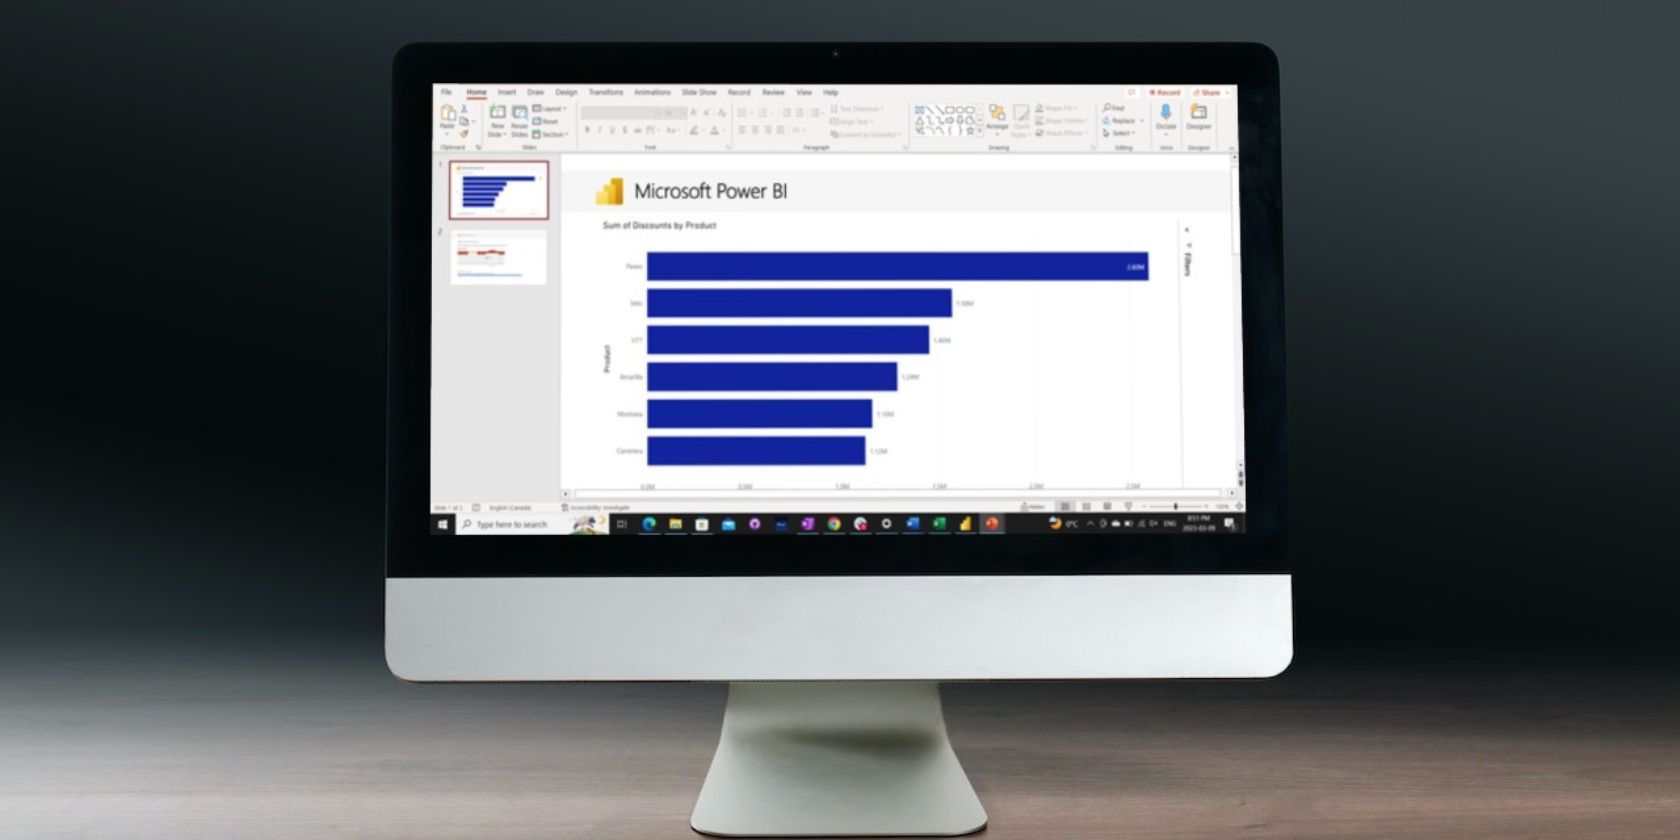 Black and White IMac Computer Monitor on wooden desk in front of a dark grey wall. On the screen is a PowerPoint Presentation with a Power BI chart